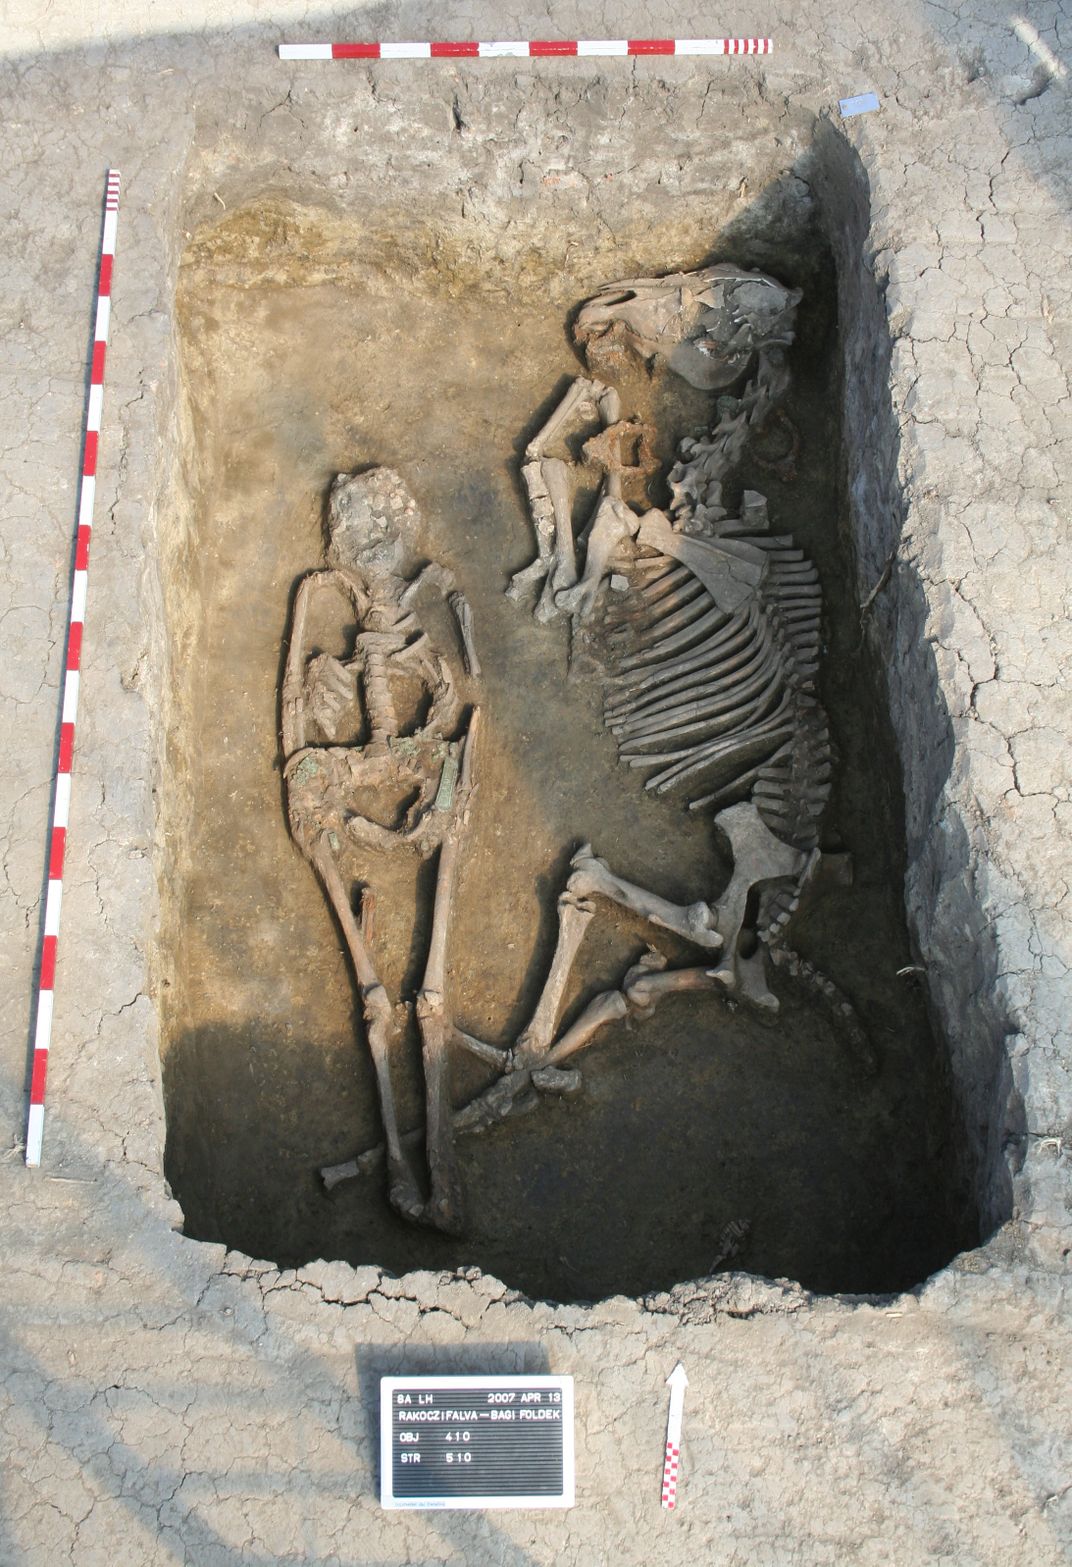 Male burial with a horse skeleton, 8th century